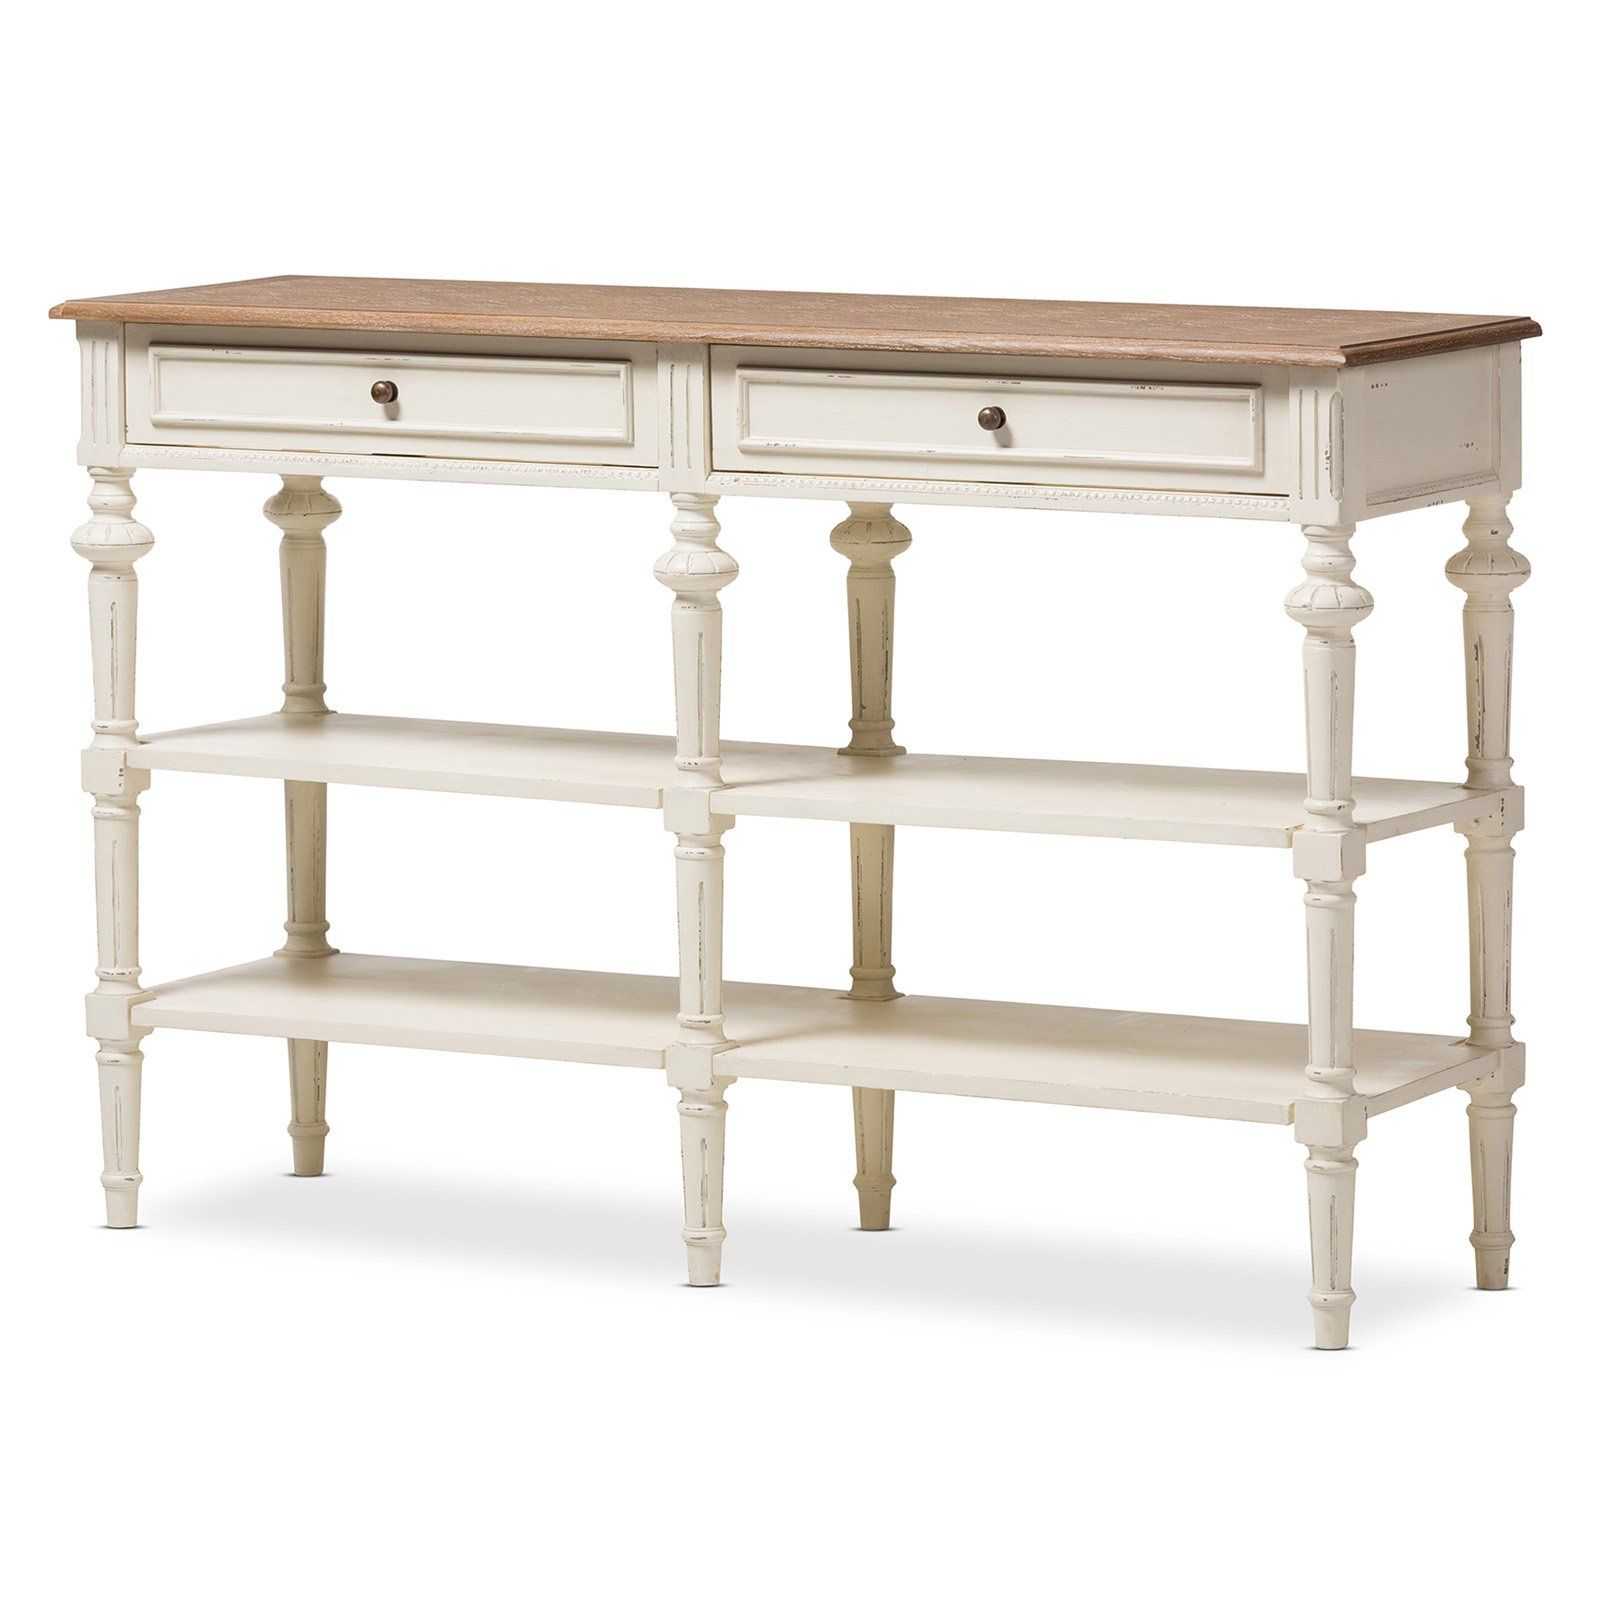 Baxton Studio Marquetterie French Oak And Whitewash Regarding Oceanside White Washed Console Tables (View 4 of 20)